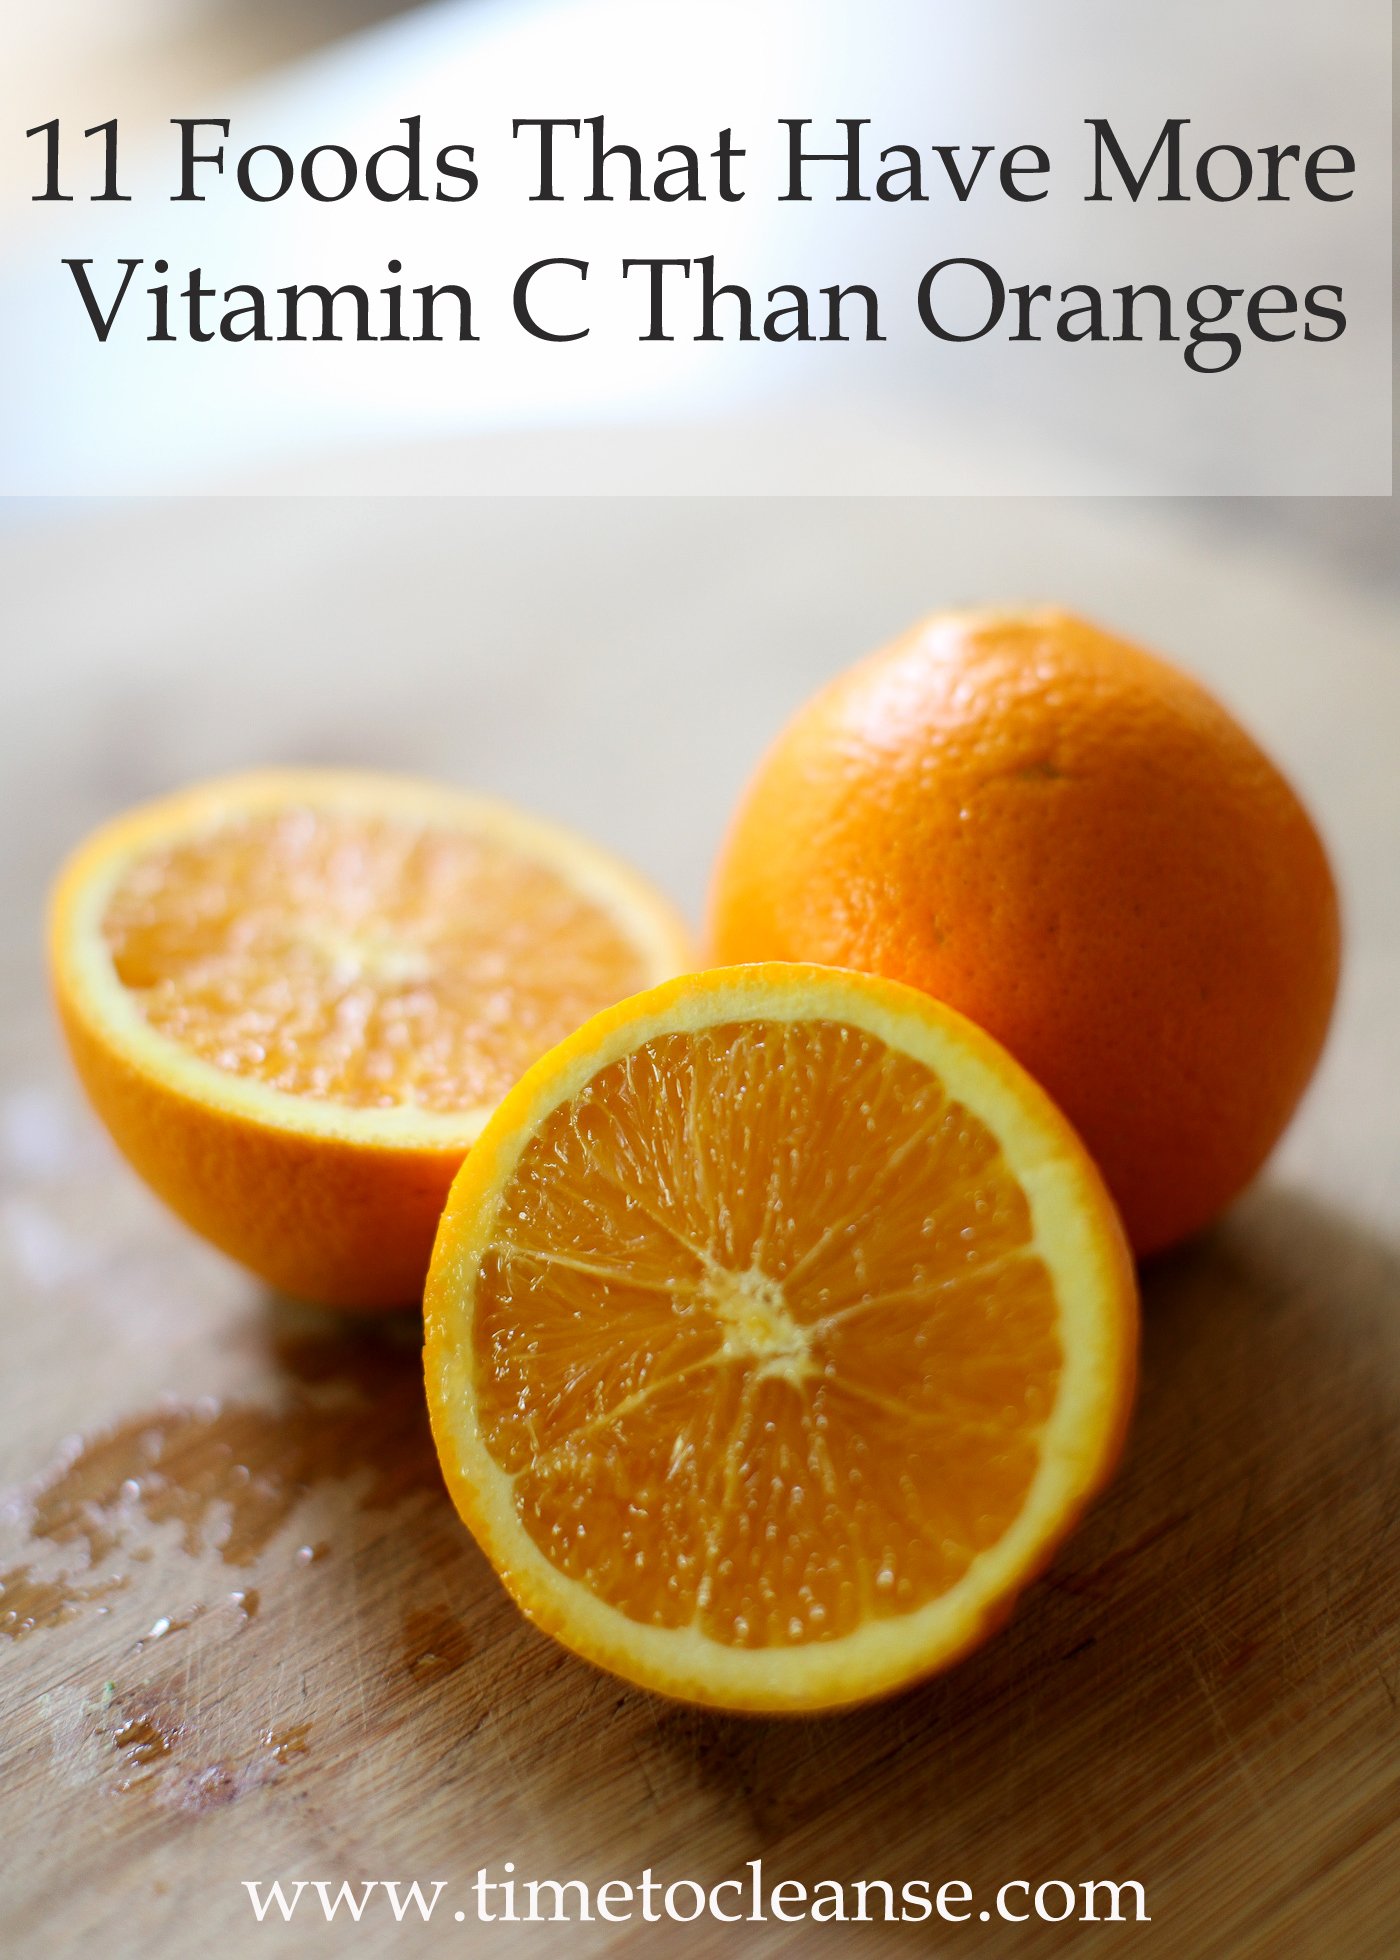 Tired of Oranges? These 11 Foods Have Even More Vitamin C